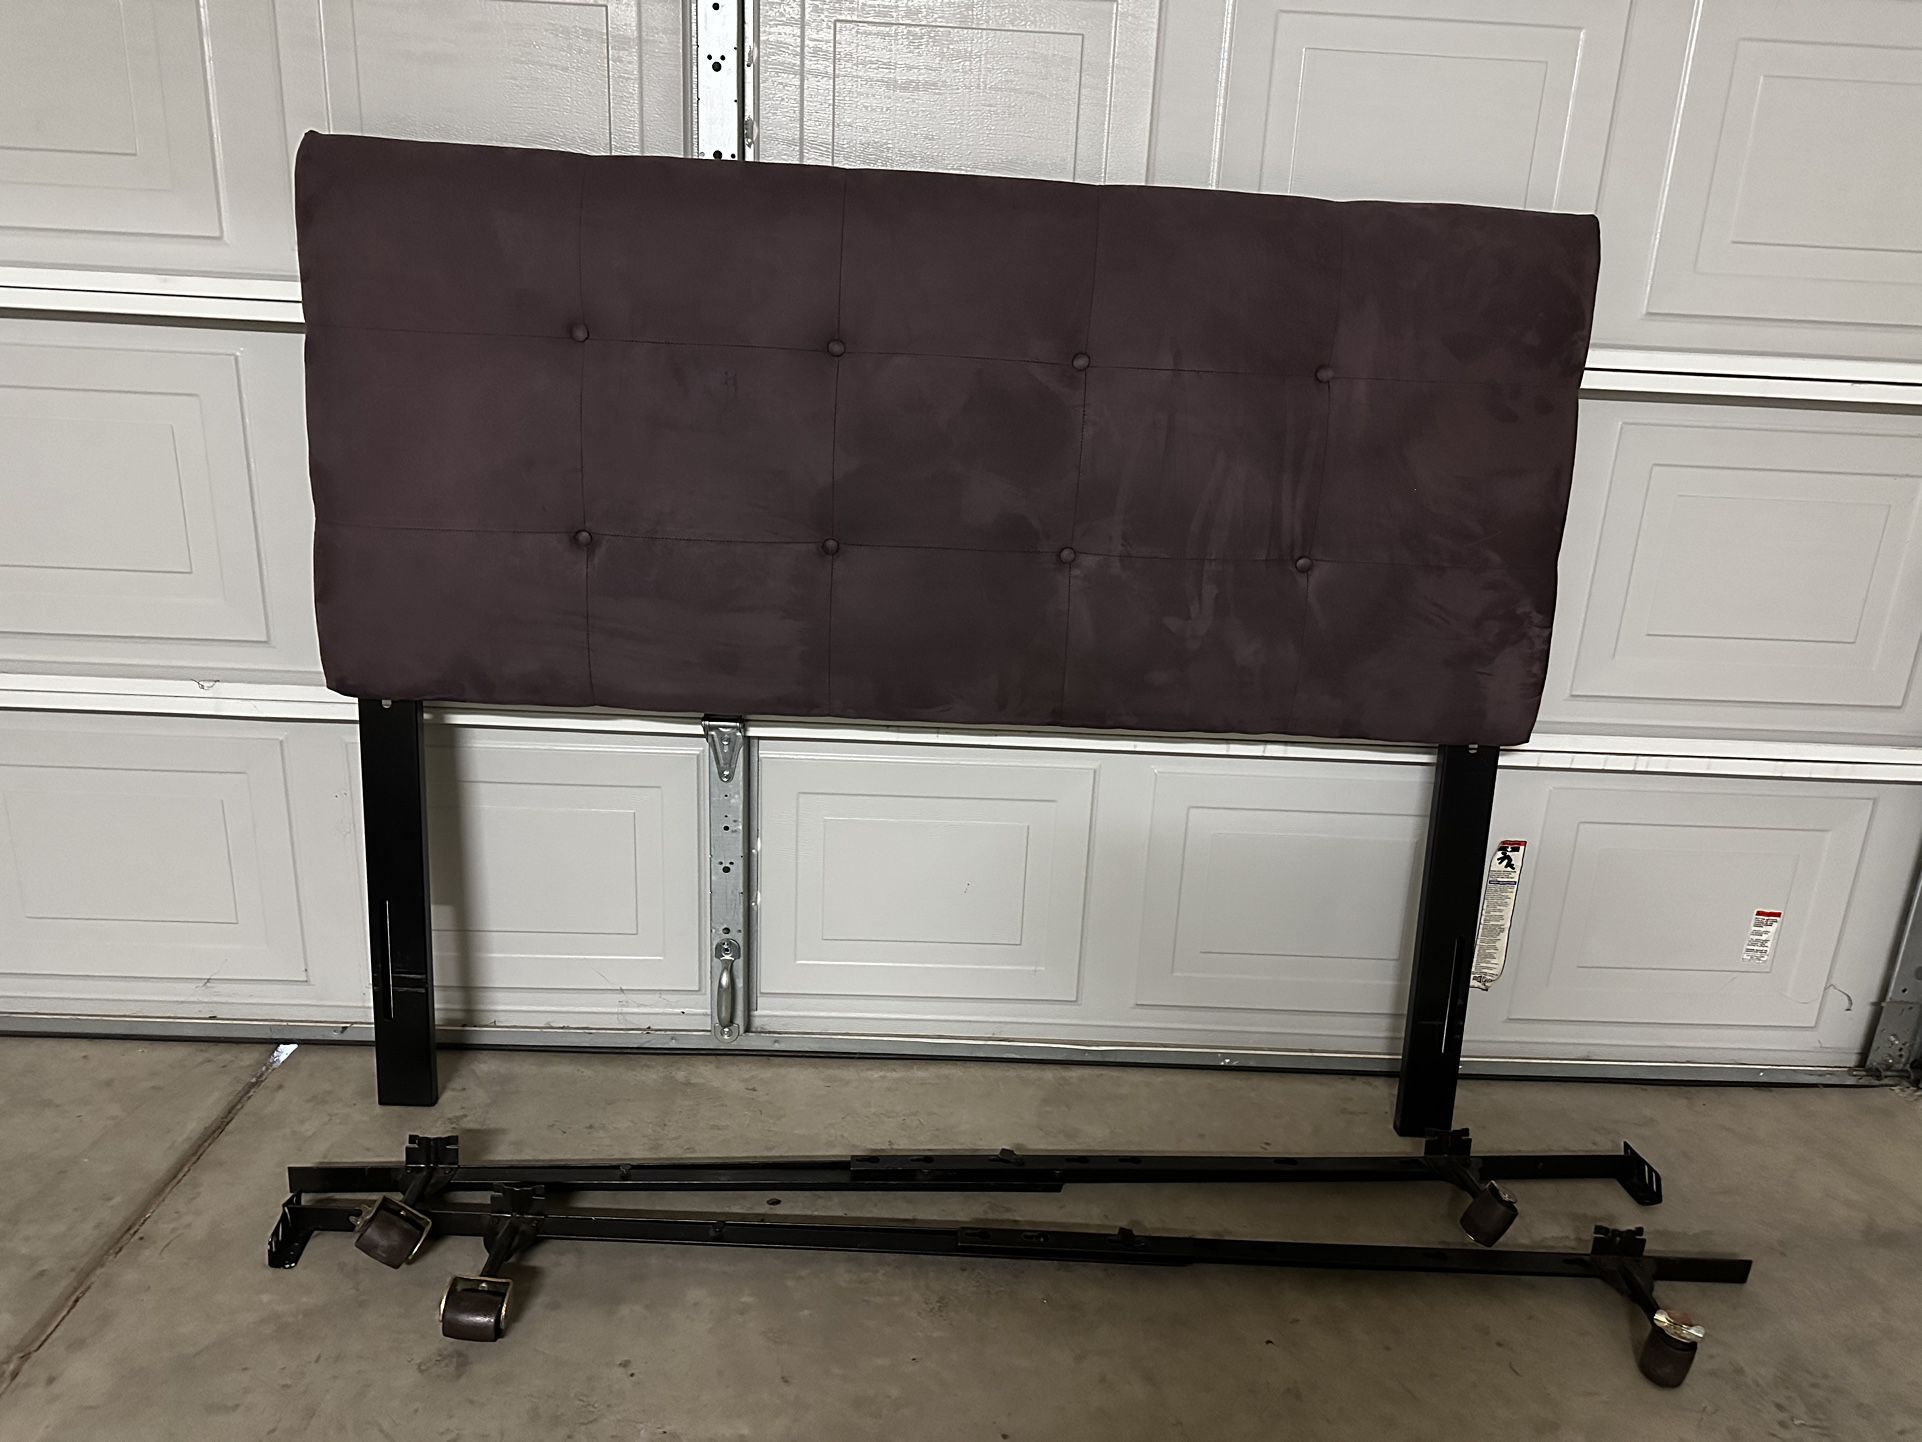 Queen Bed Headboard And Rails